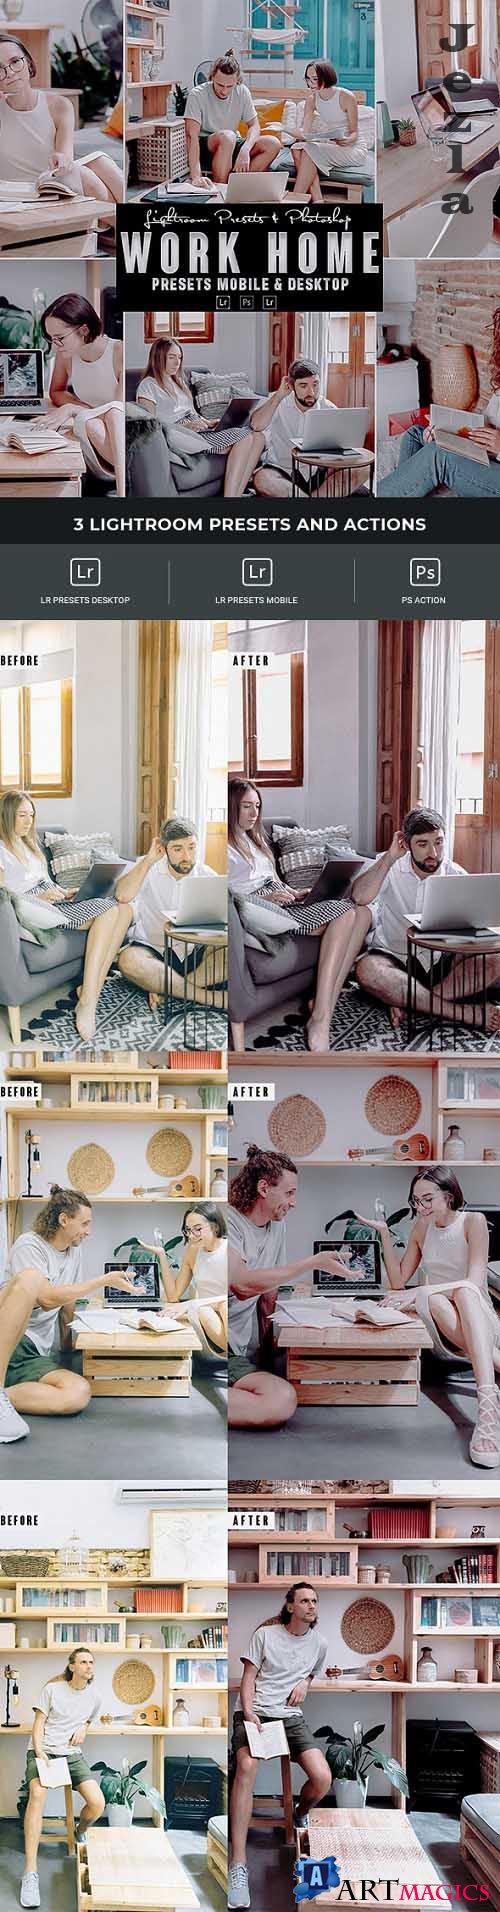 Work Home Photoshop Actions and Lightrom Presets - 34698528